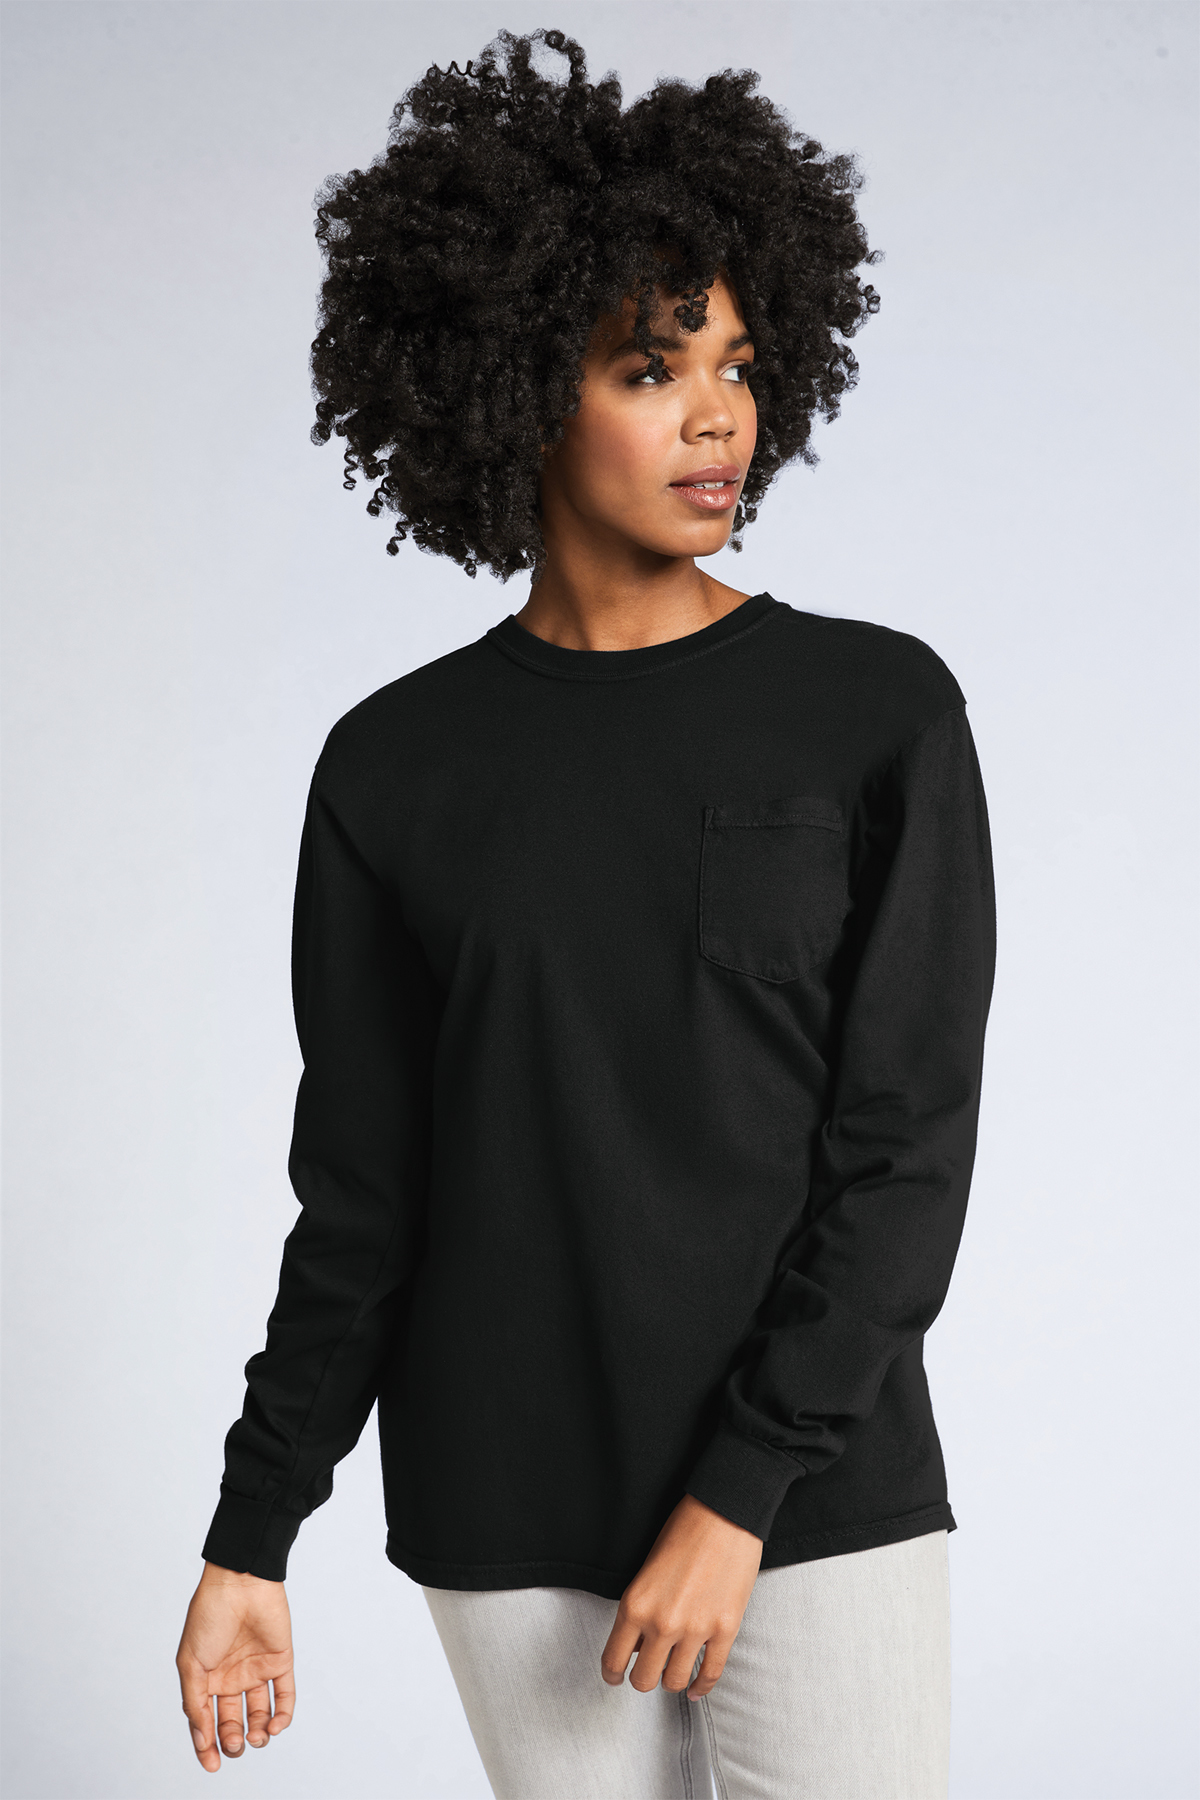 Authentic Longsleeve Tee: Discover Comfort and Style! – Twisted Swag, Inc.